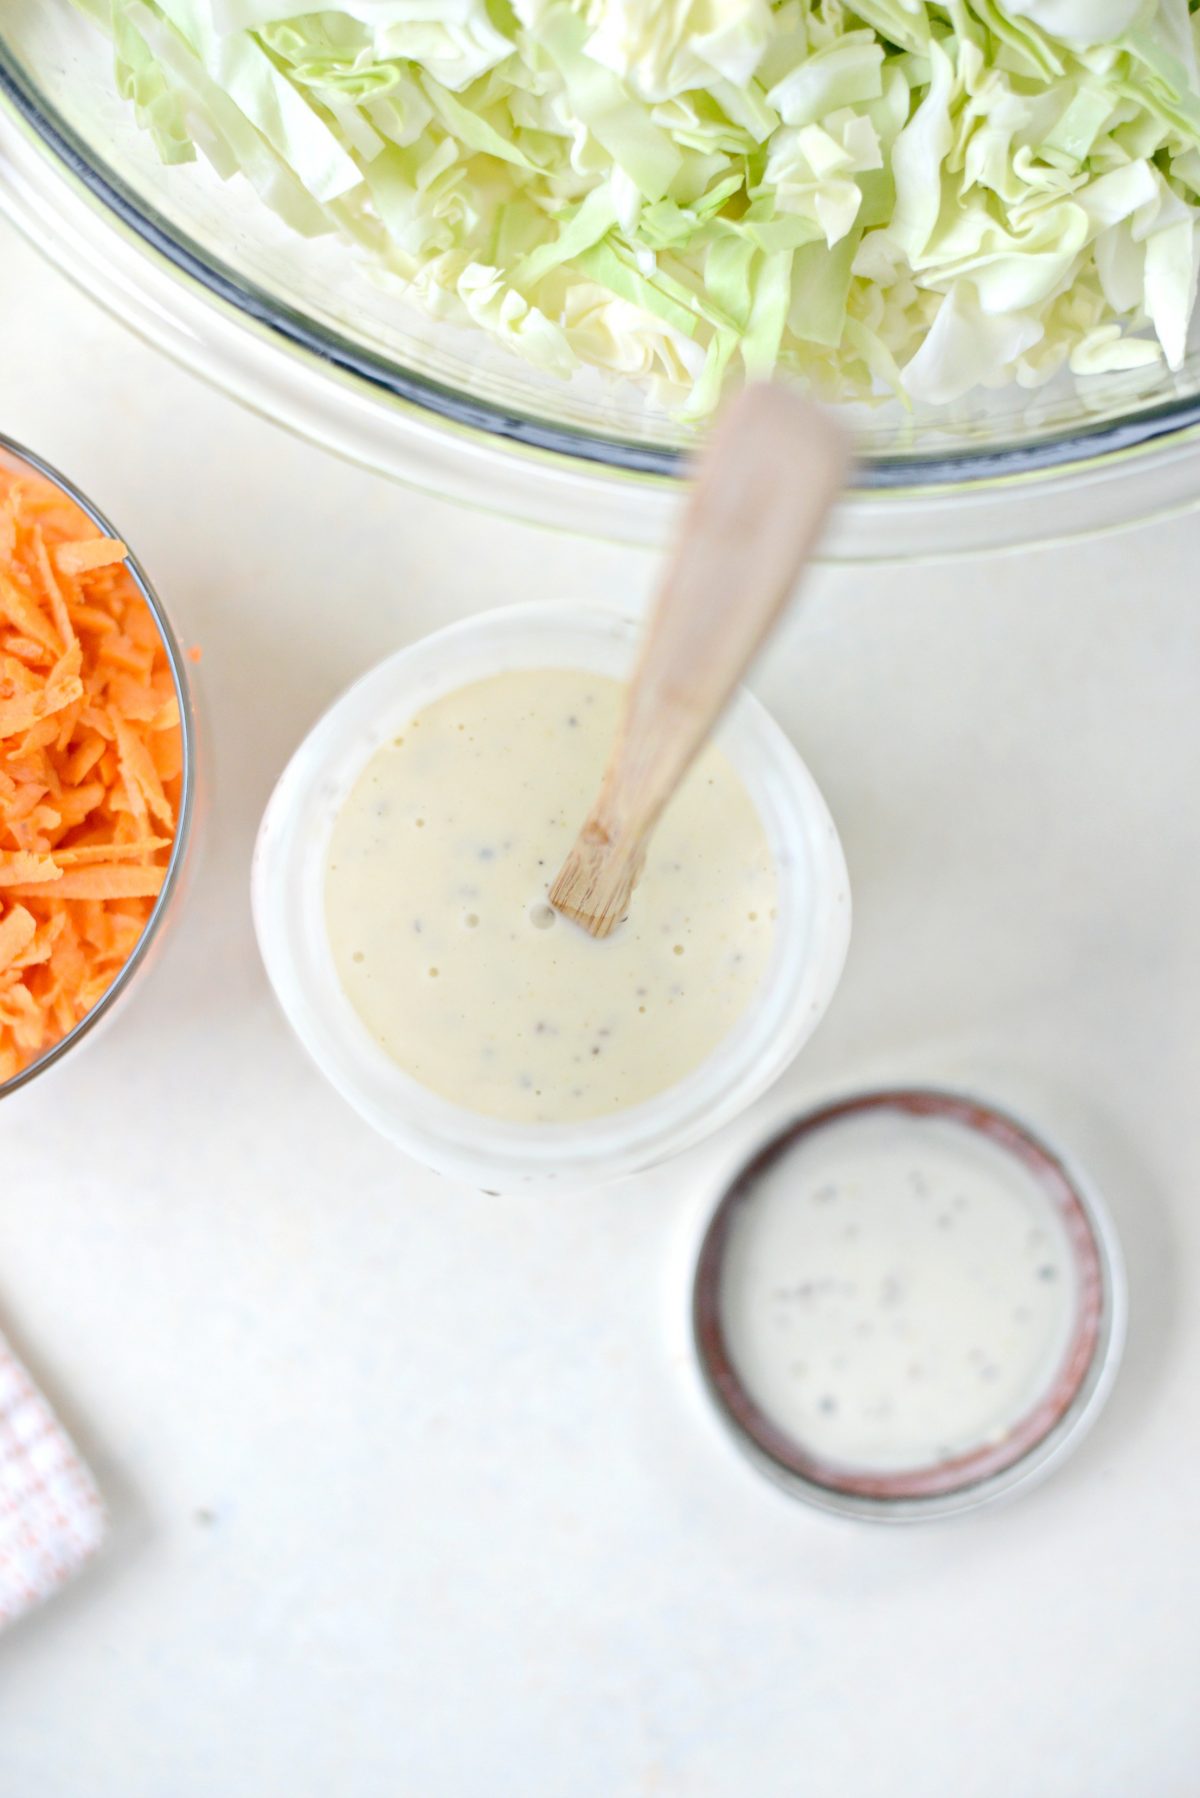 Classic Coleslaw Recipe with Homemade Dressing l SimplyScratch.com (6)